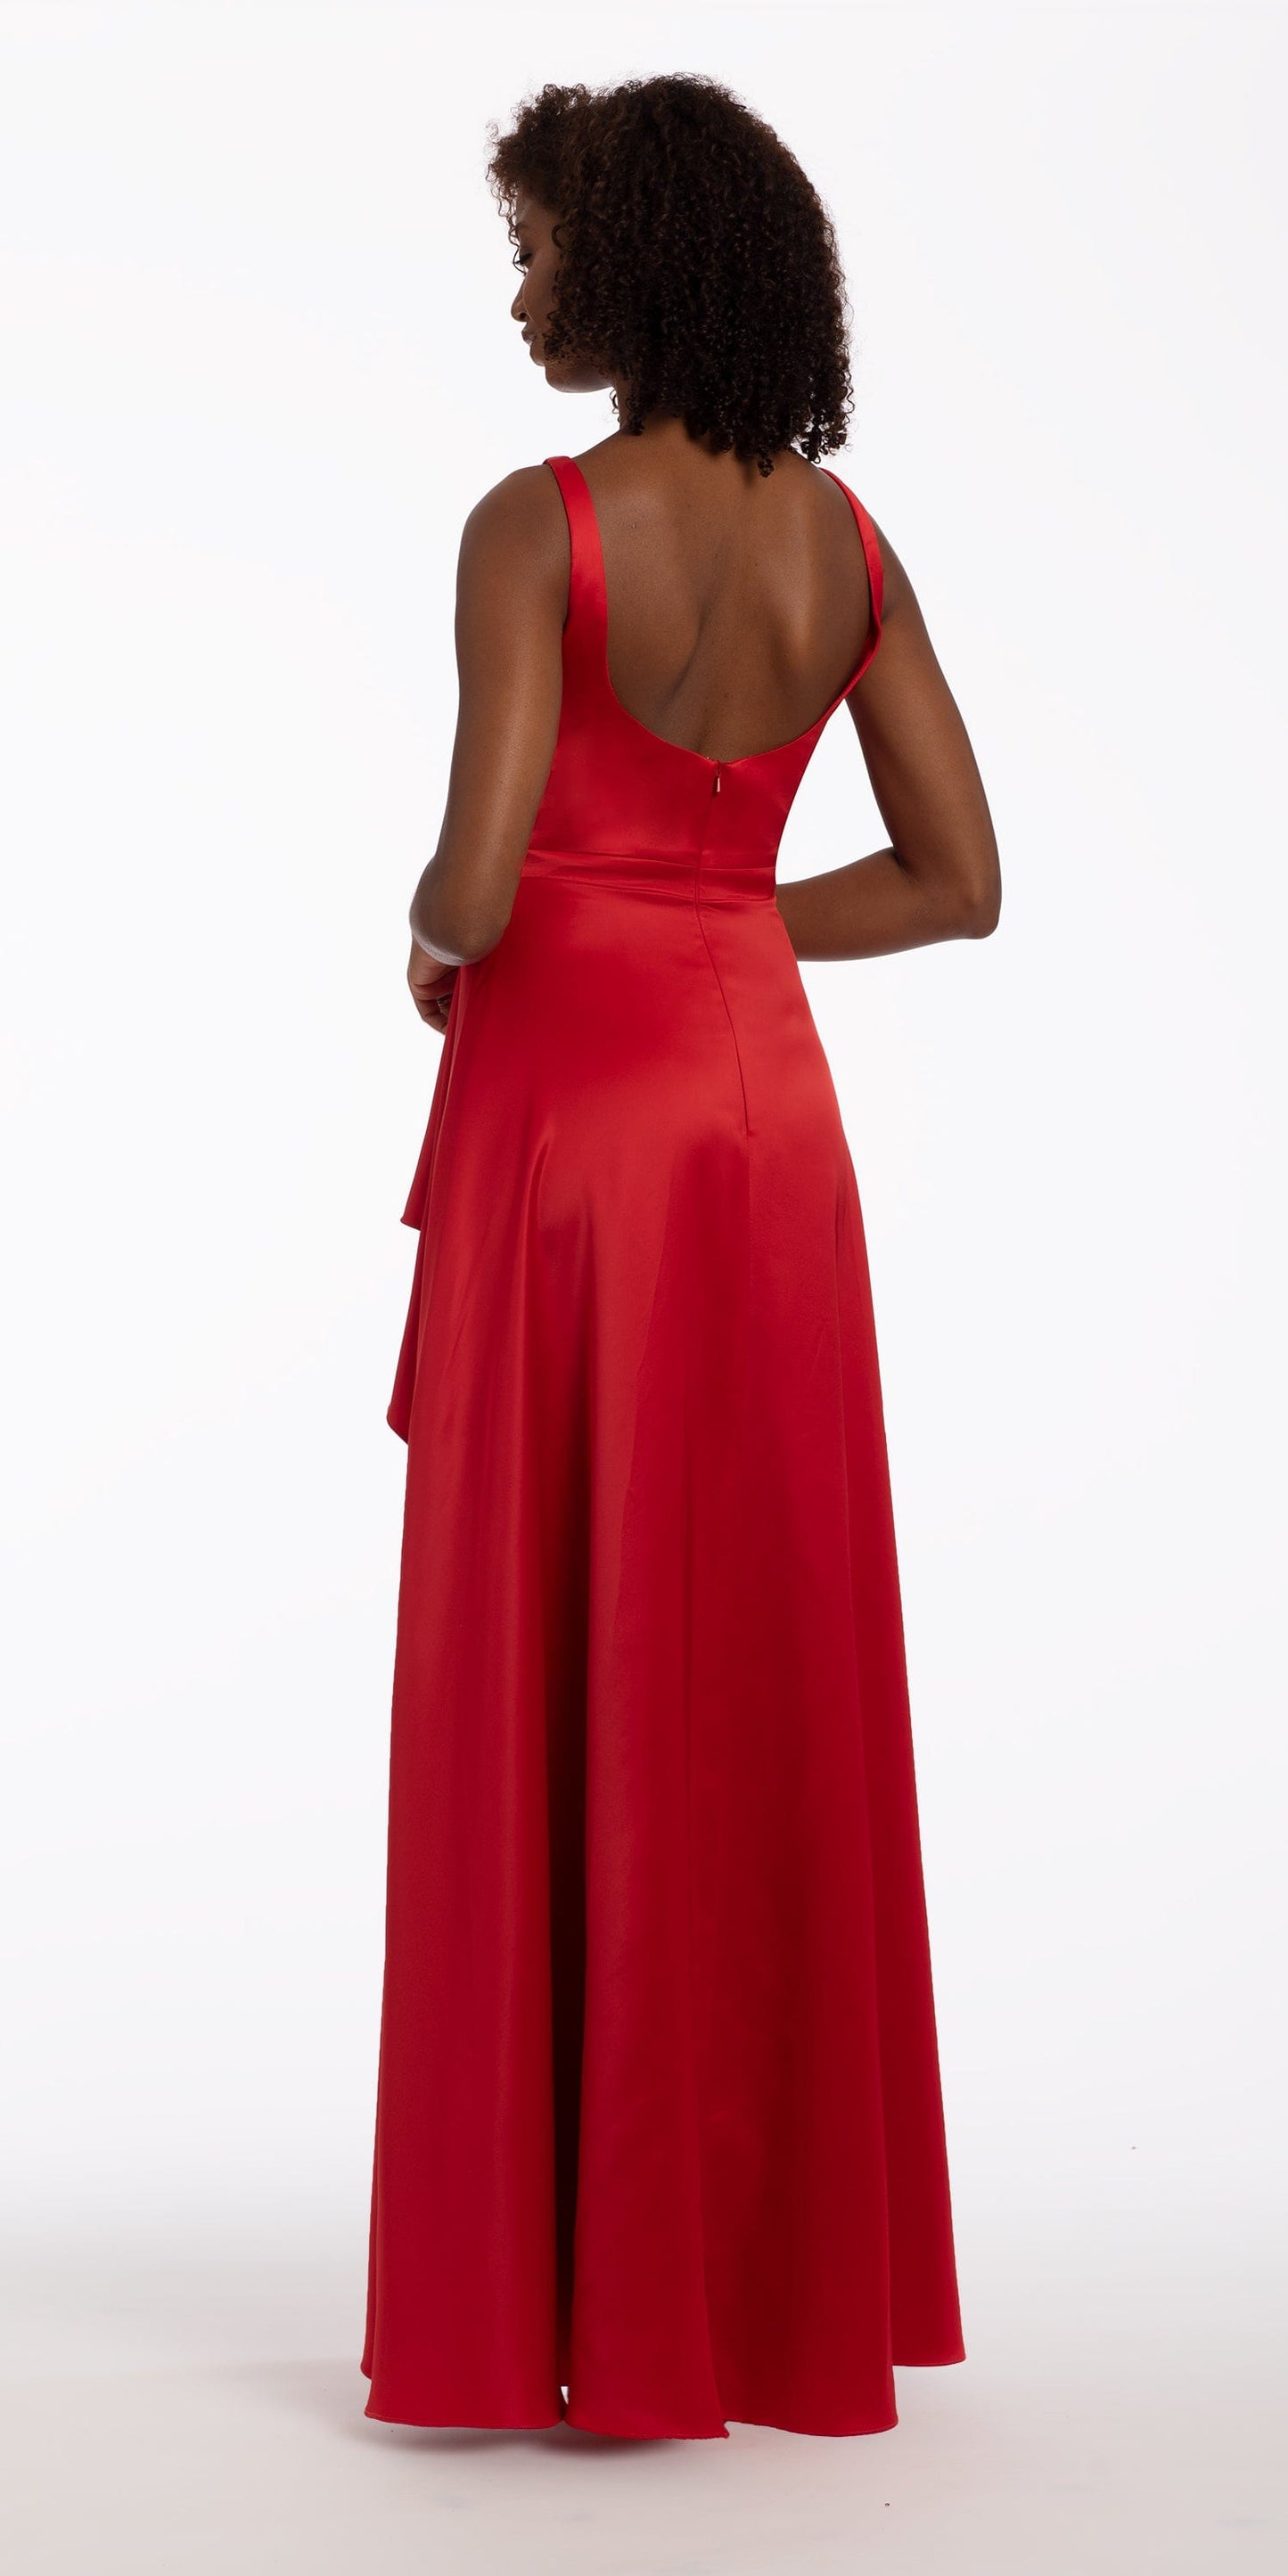 Camille La Vie Deep Scoop Satin  A line Dress  with Cascading Ruffle